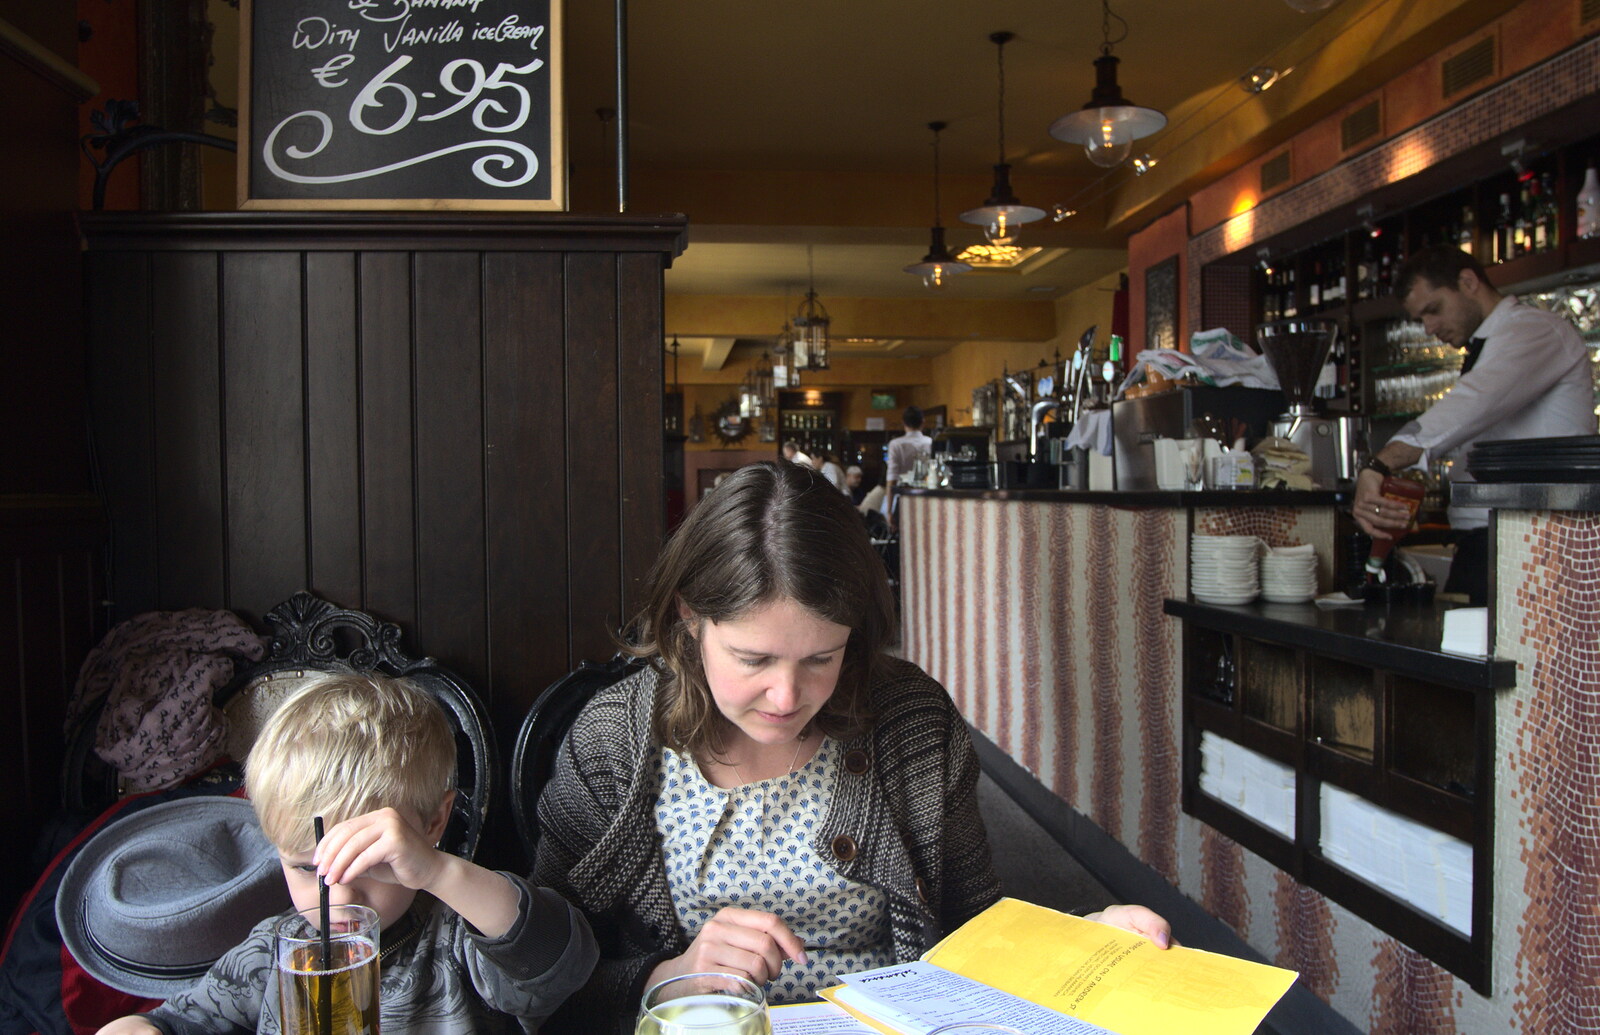 Time for lunch at Salamanca Tapas bar from Temple Bar and Dun Laoghaire, Dublin, Ireland - 16th April 2015